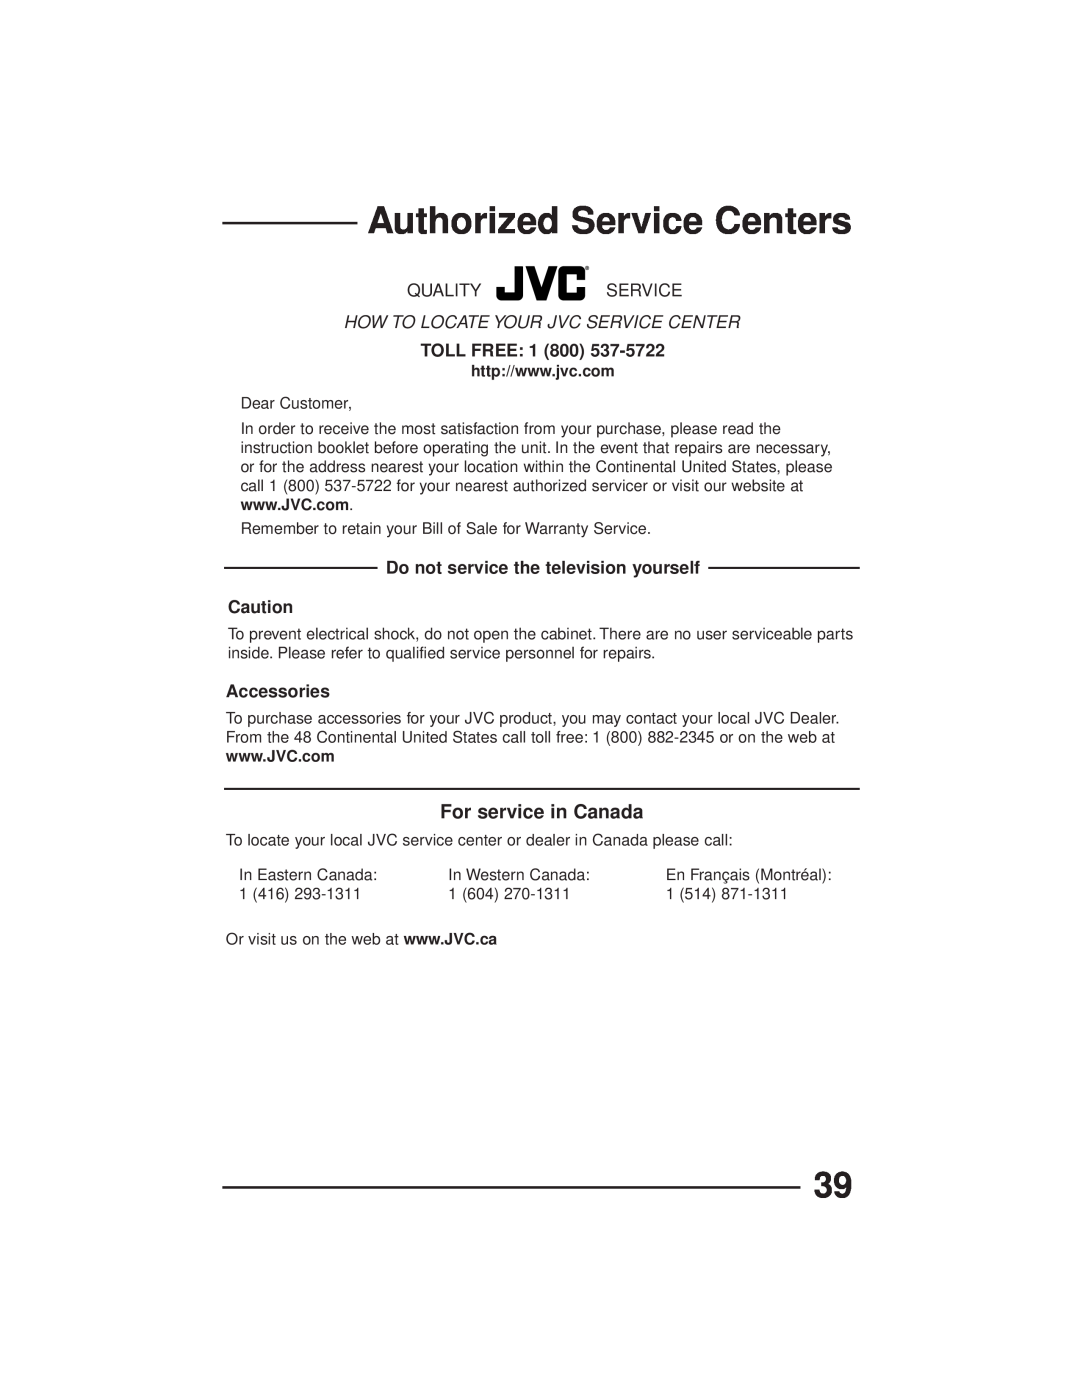 JVC AV-27GFH Authorized Service Centers, For service in Canada, How To Locate Your Jvc Service Center, TOLL FREE 1 800 